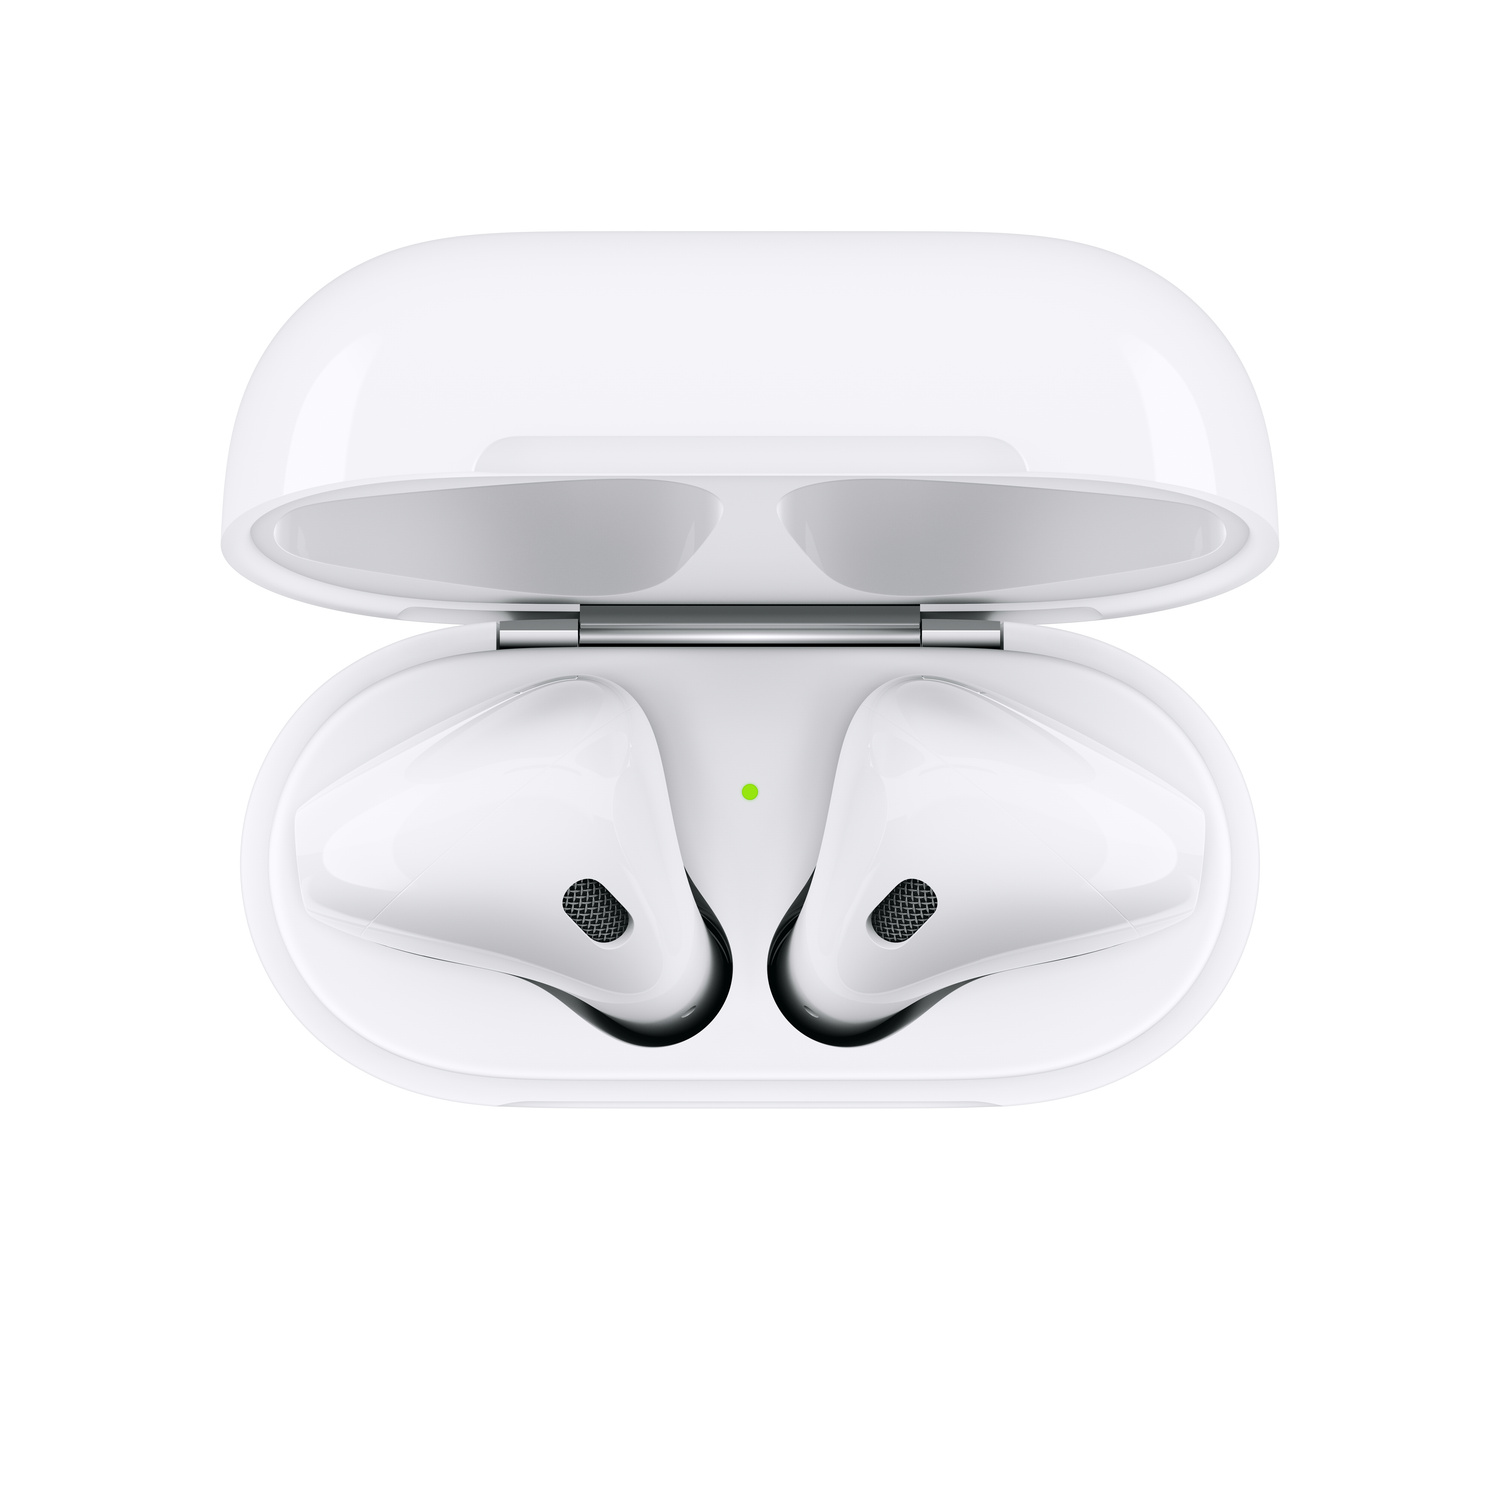 Apple AirPods (2nd generation) White MV7N2AM/A - $119.99 at Best Buy